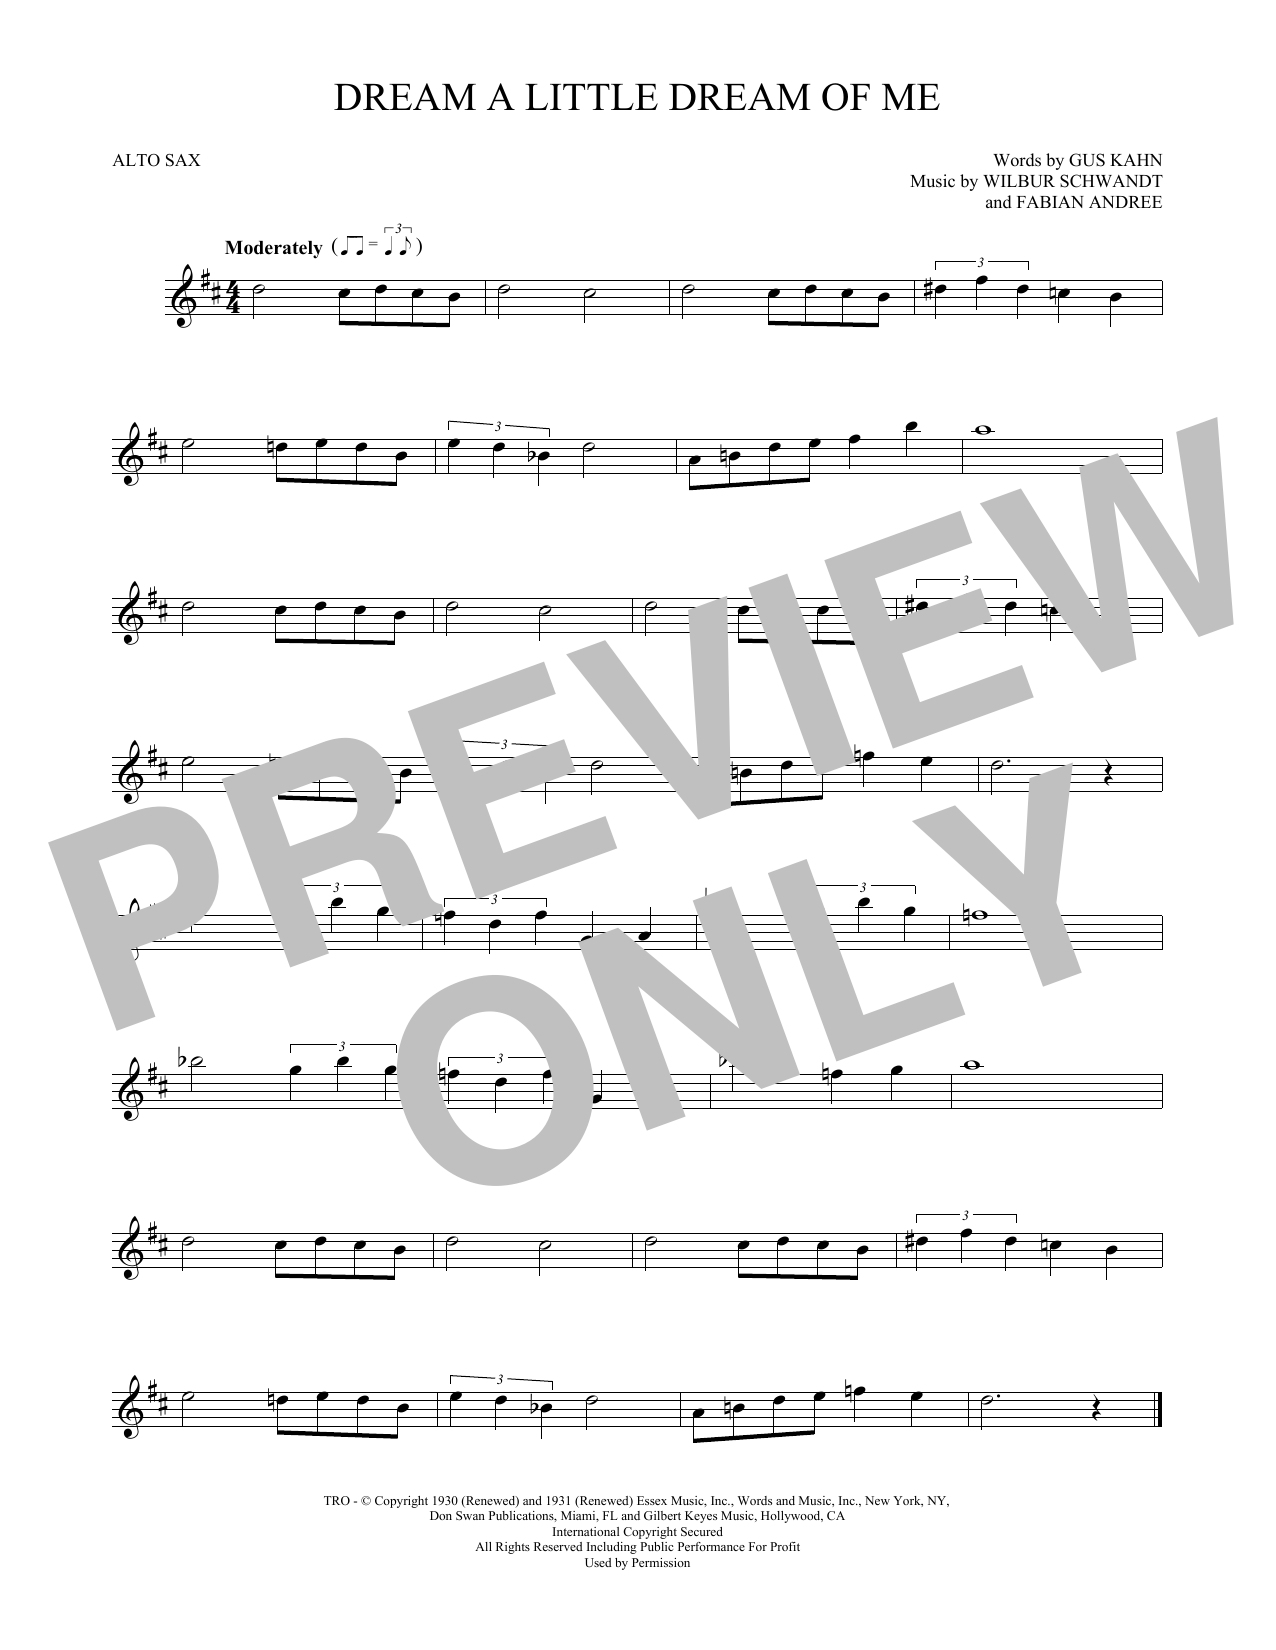 Download The Mamas & The Papas Dream A Little Dream Of Me Sheet Music